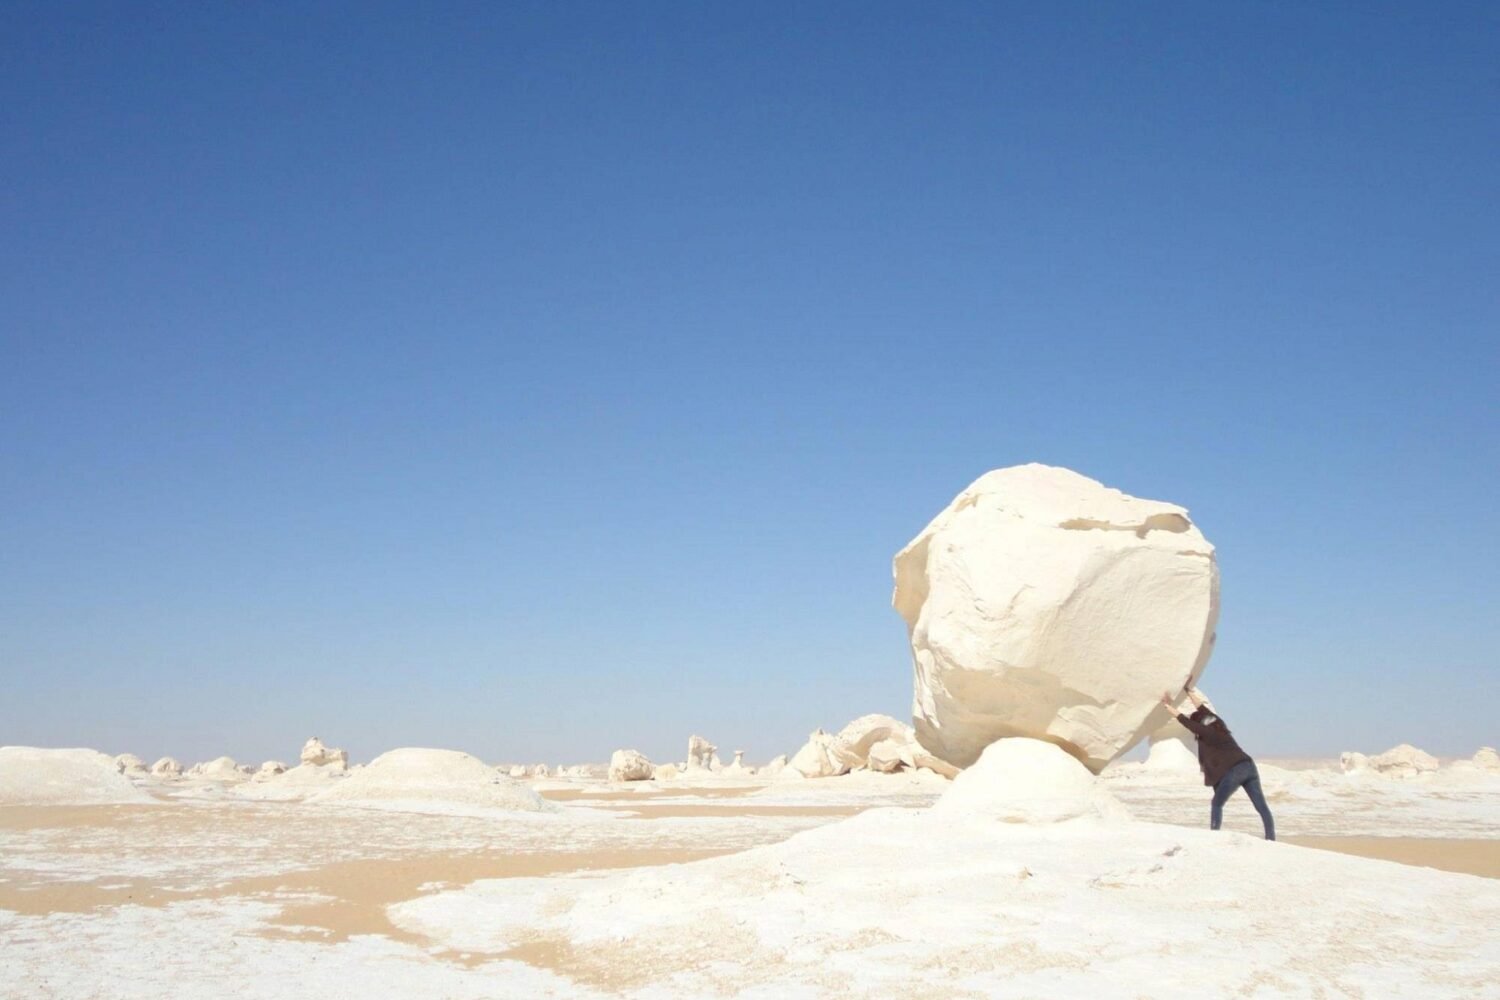 White Desert Expedition: A 3-Day Tour From Cairo